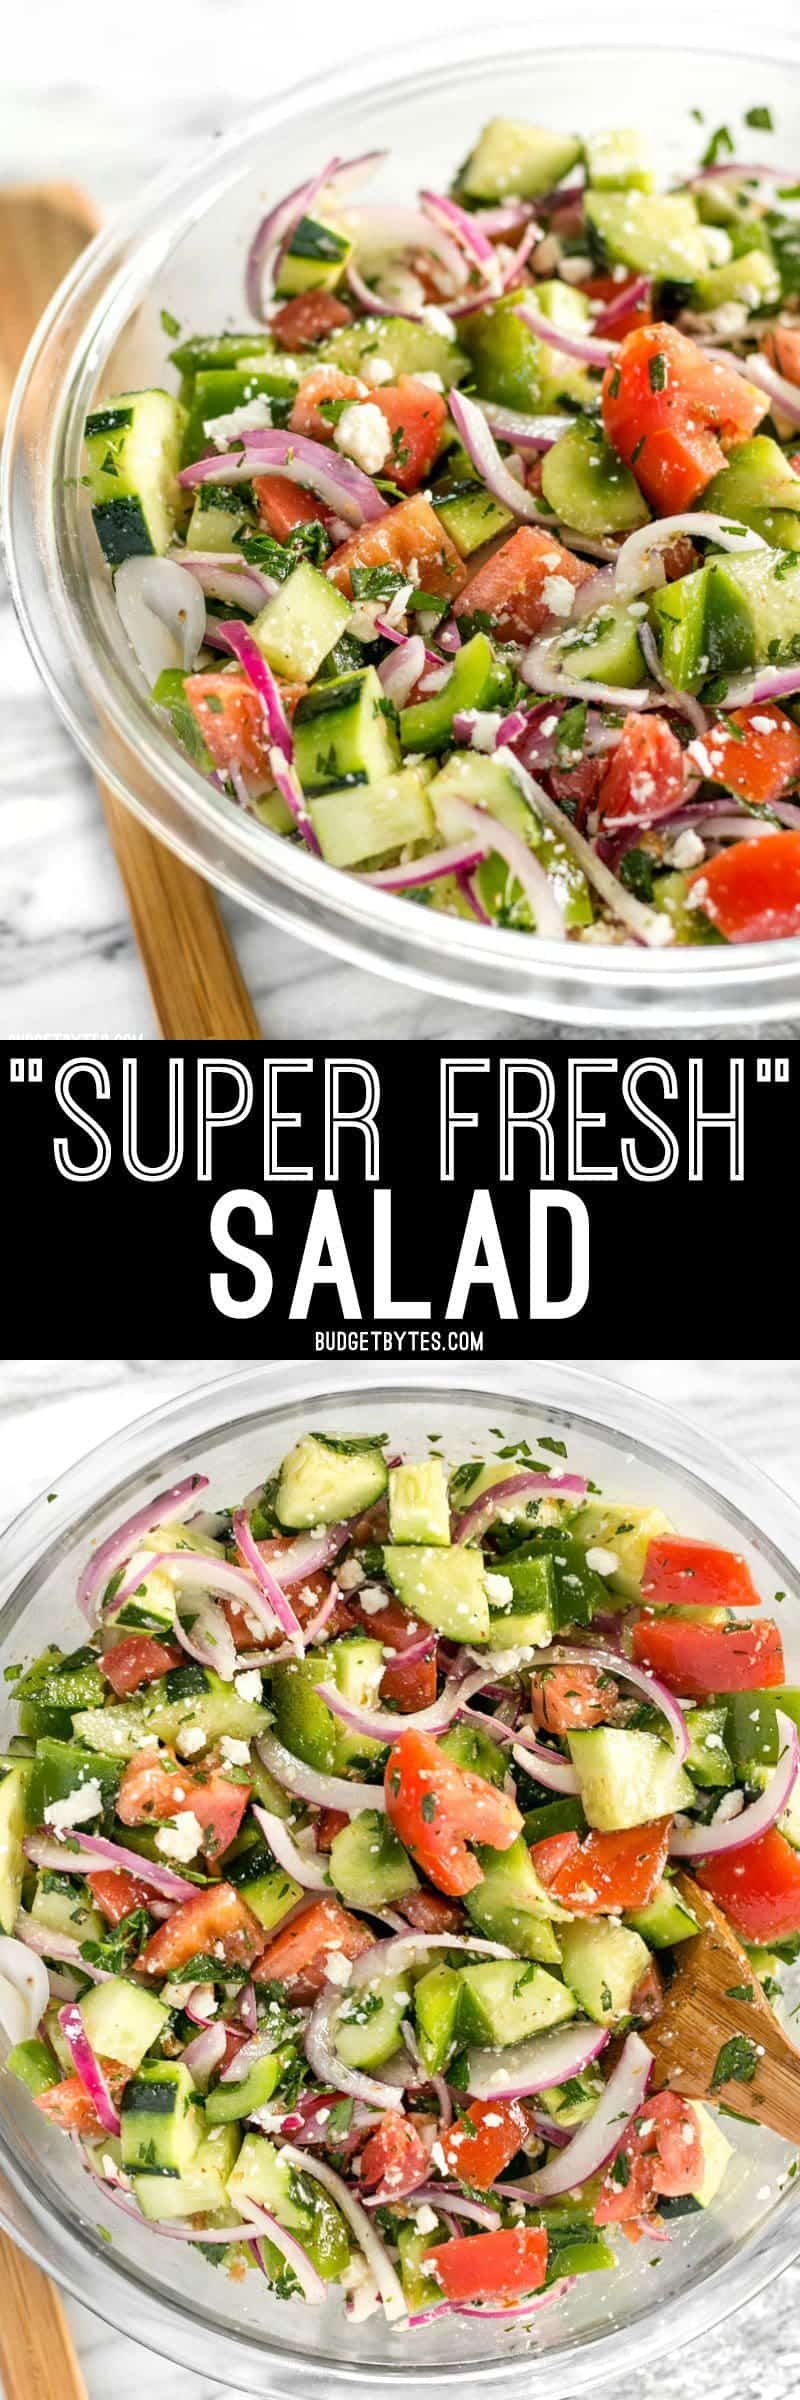 Super Fresh Salad is a cold, crunchy, juicy mix of flavorful vegetables topped with a simple red wine and oregano vinaigrette. BudgetBytes.com